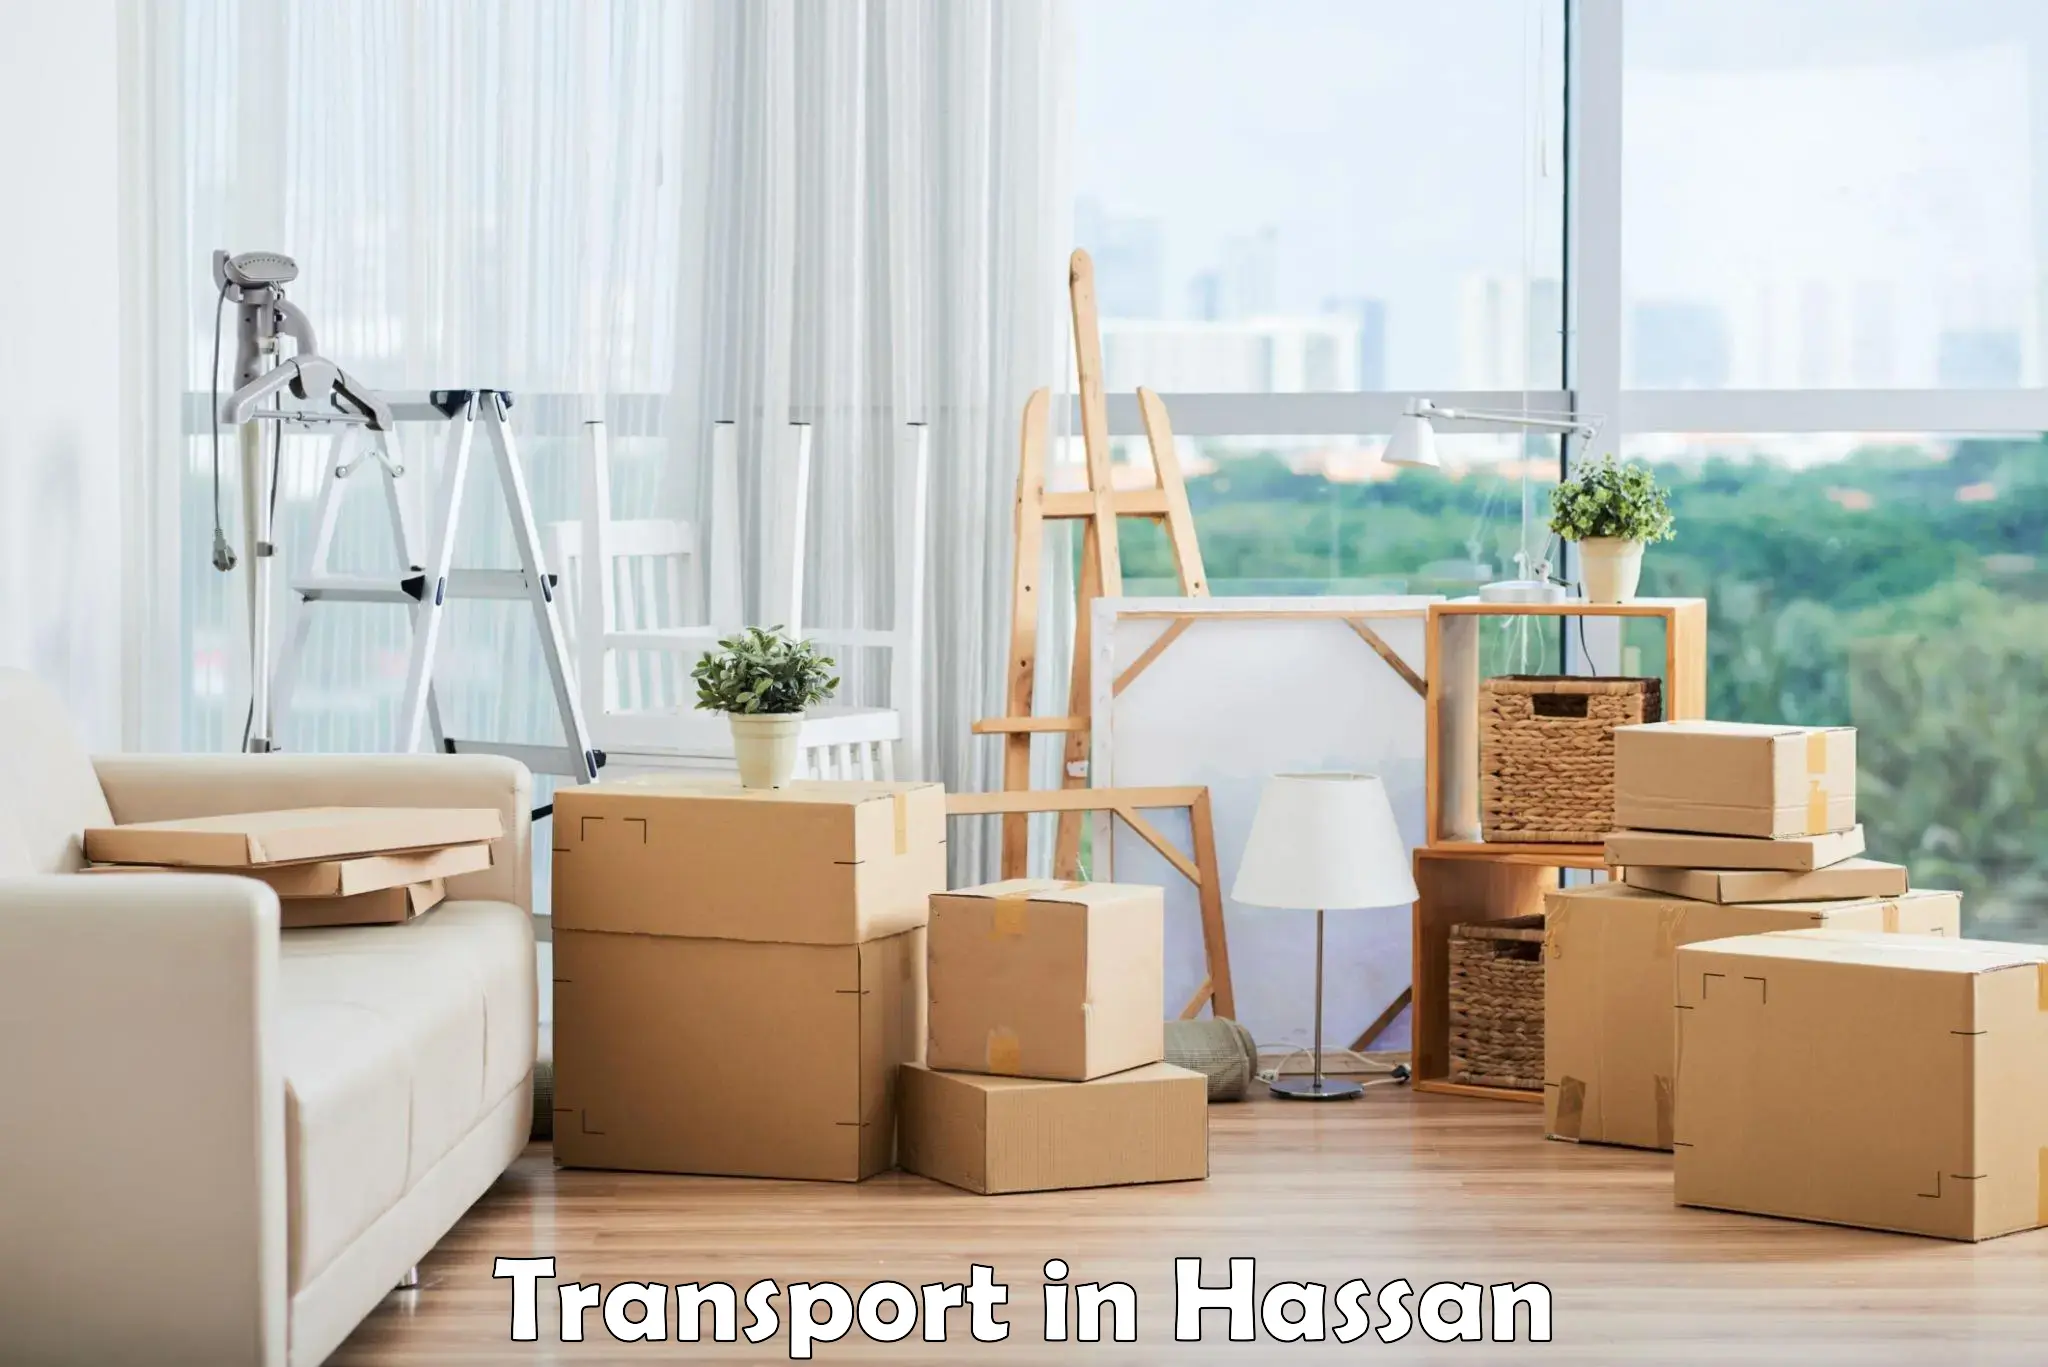 Road transport services in Hassan